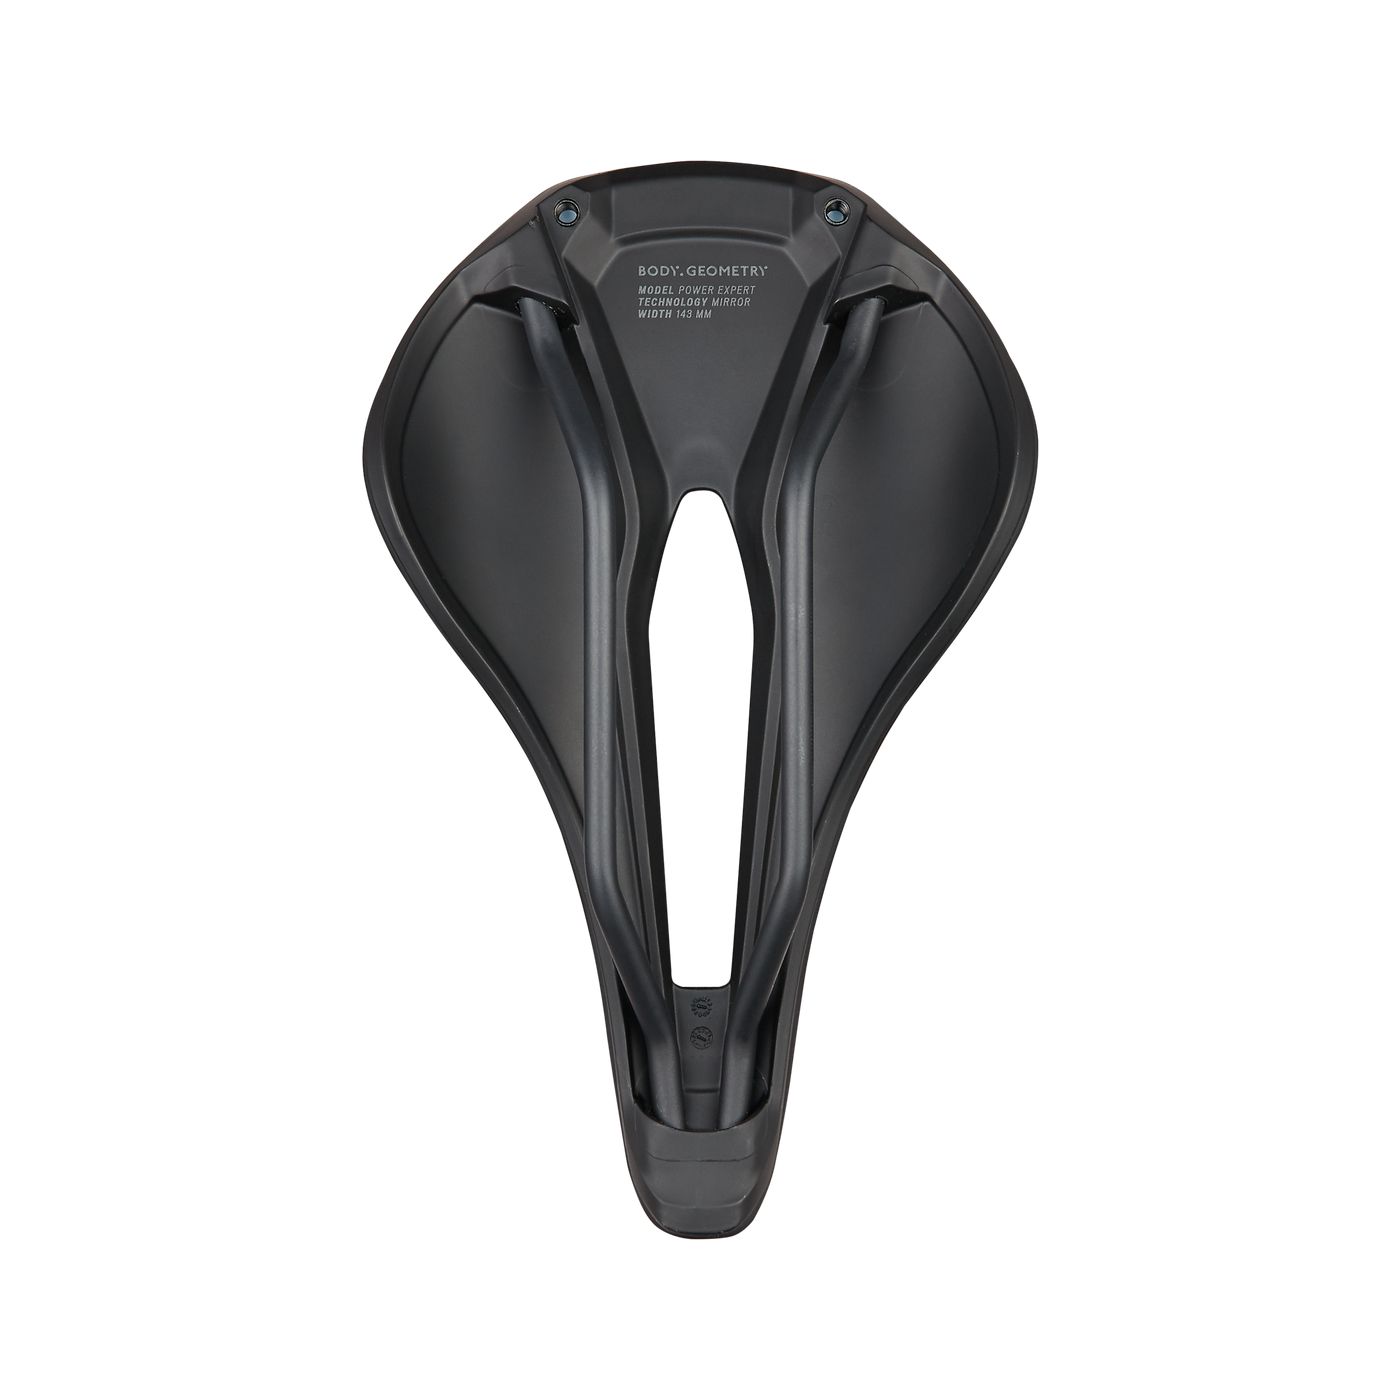 Specialized Power Expert with Mirror Bike Saddle - Saddles - Bicycle Warehouse